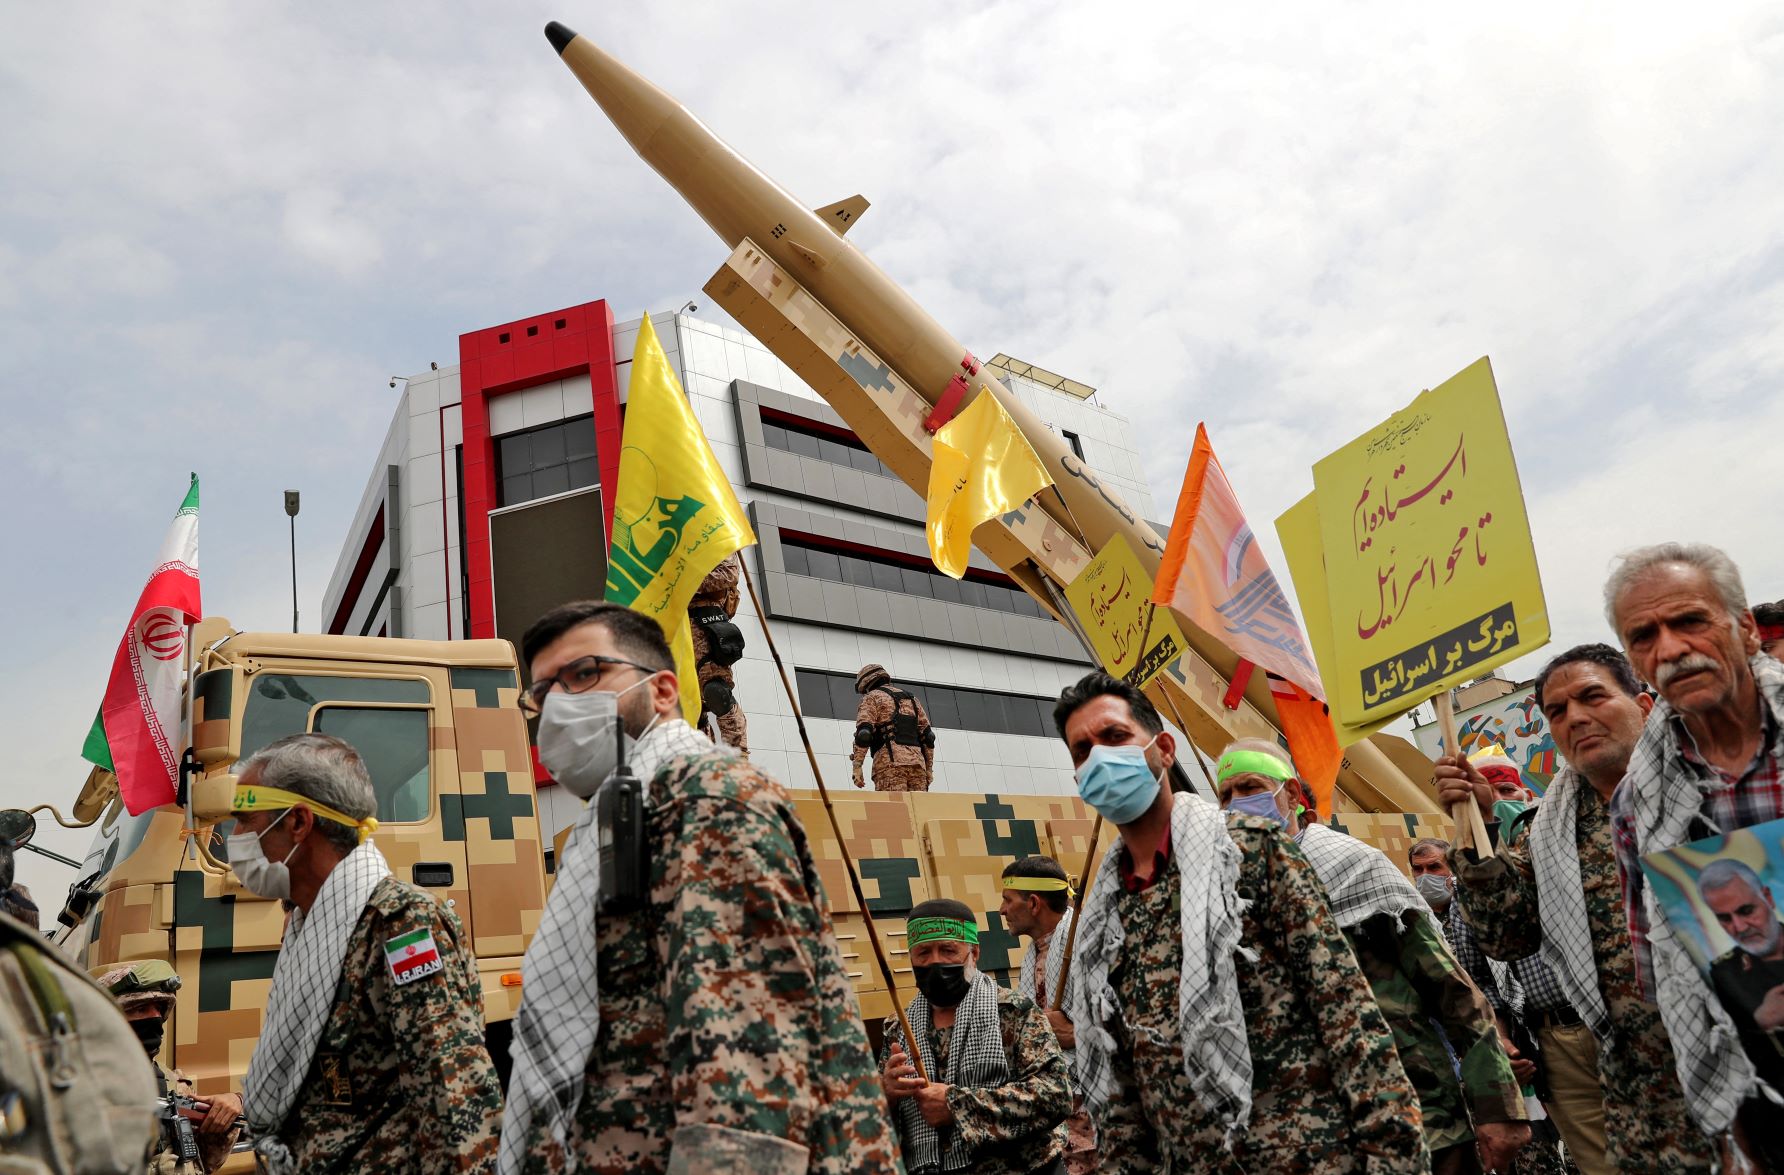 Iranian Basij paramilitary forces take part in a rally marking al-Quds (Jerusalem) day near a Shahab-3 missile in a street in the capital Tehran, on April 29, 2022 (AFP)